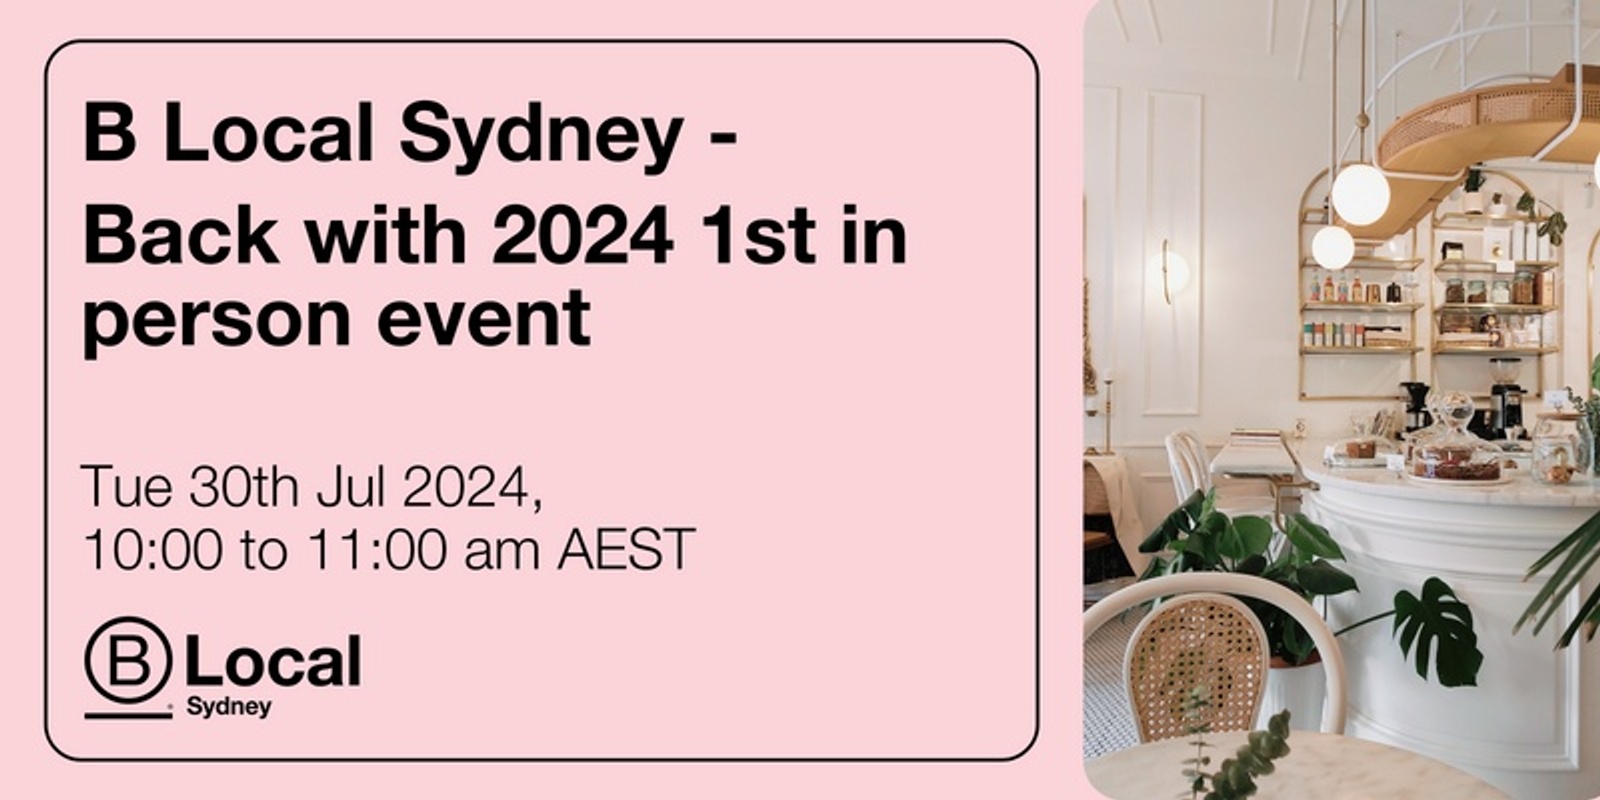 Banner image for B Local Sydney - We are back with our 1st 2024 event